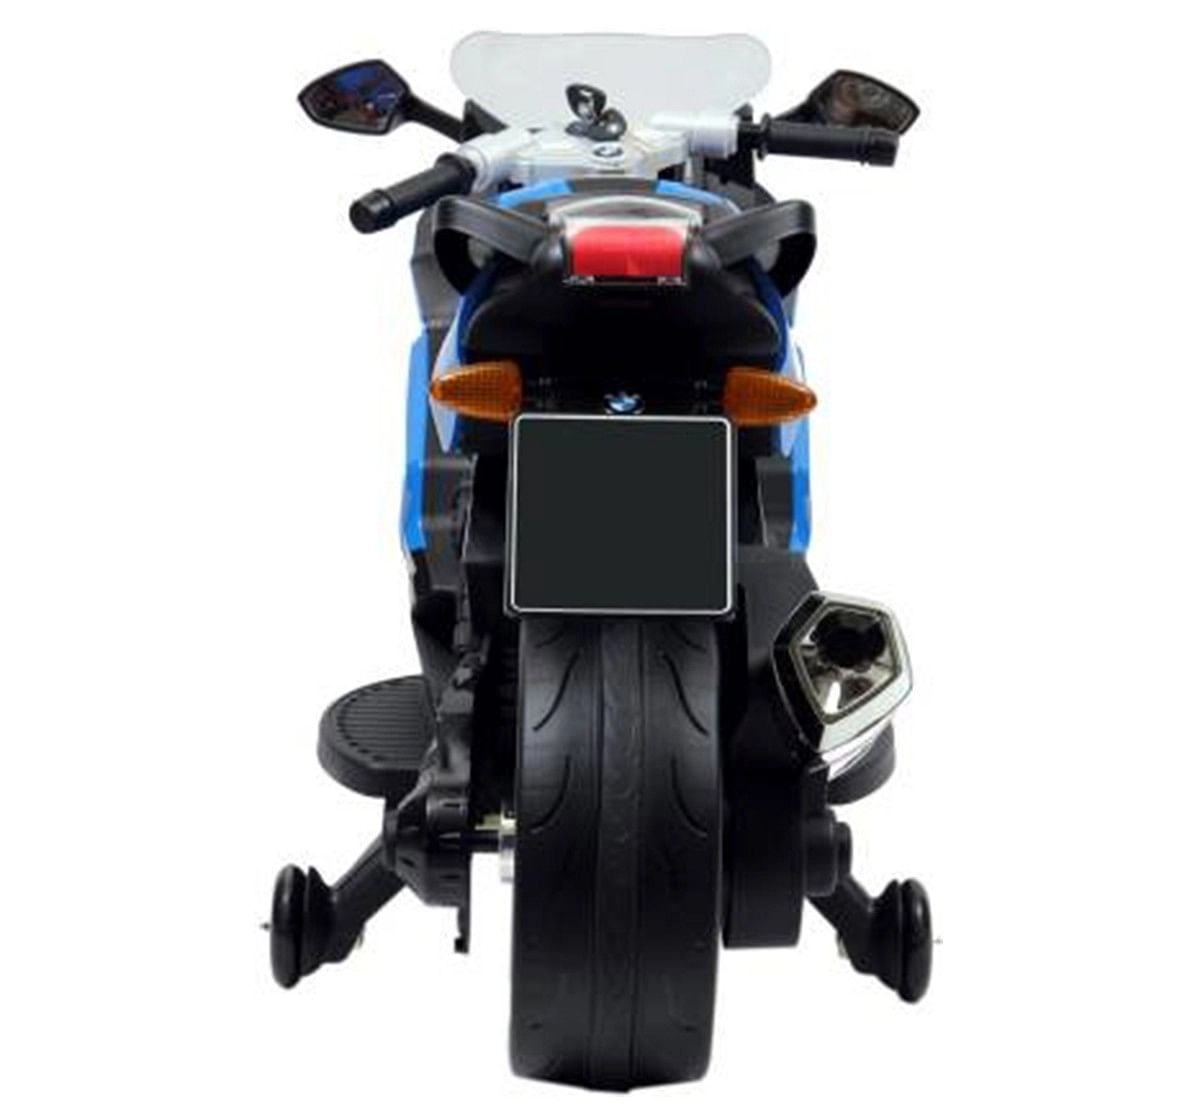 Chilokbo BMW K1300S Battery Operated Ride-On Bike,  3Y+ (Multicolor)